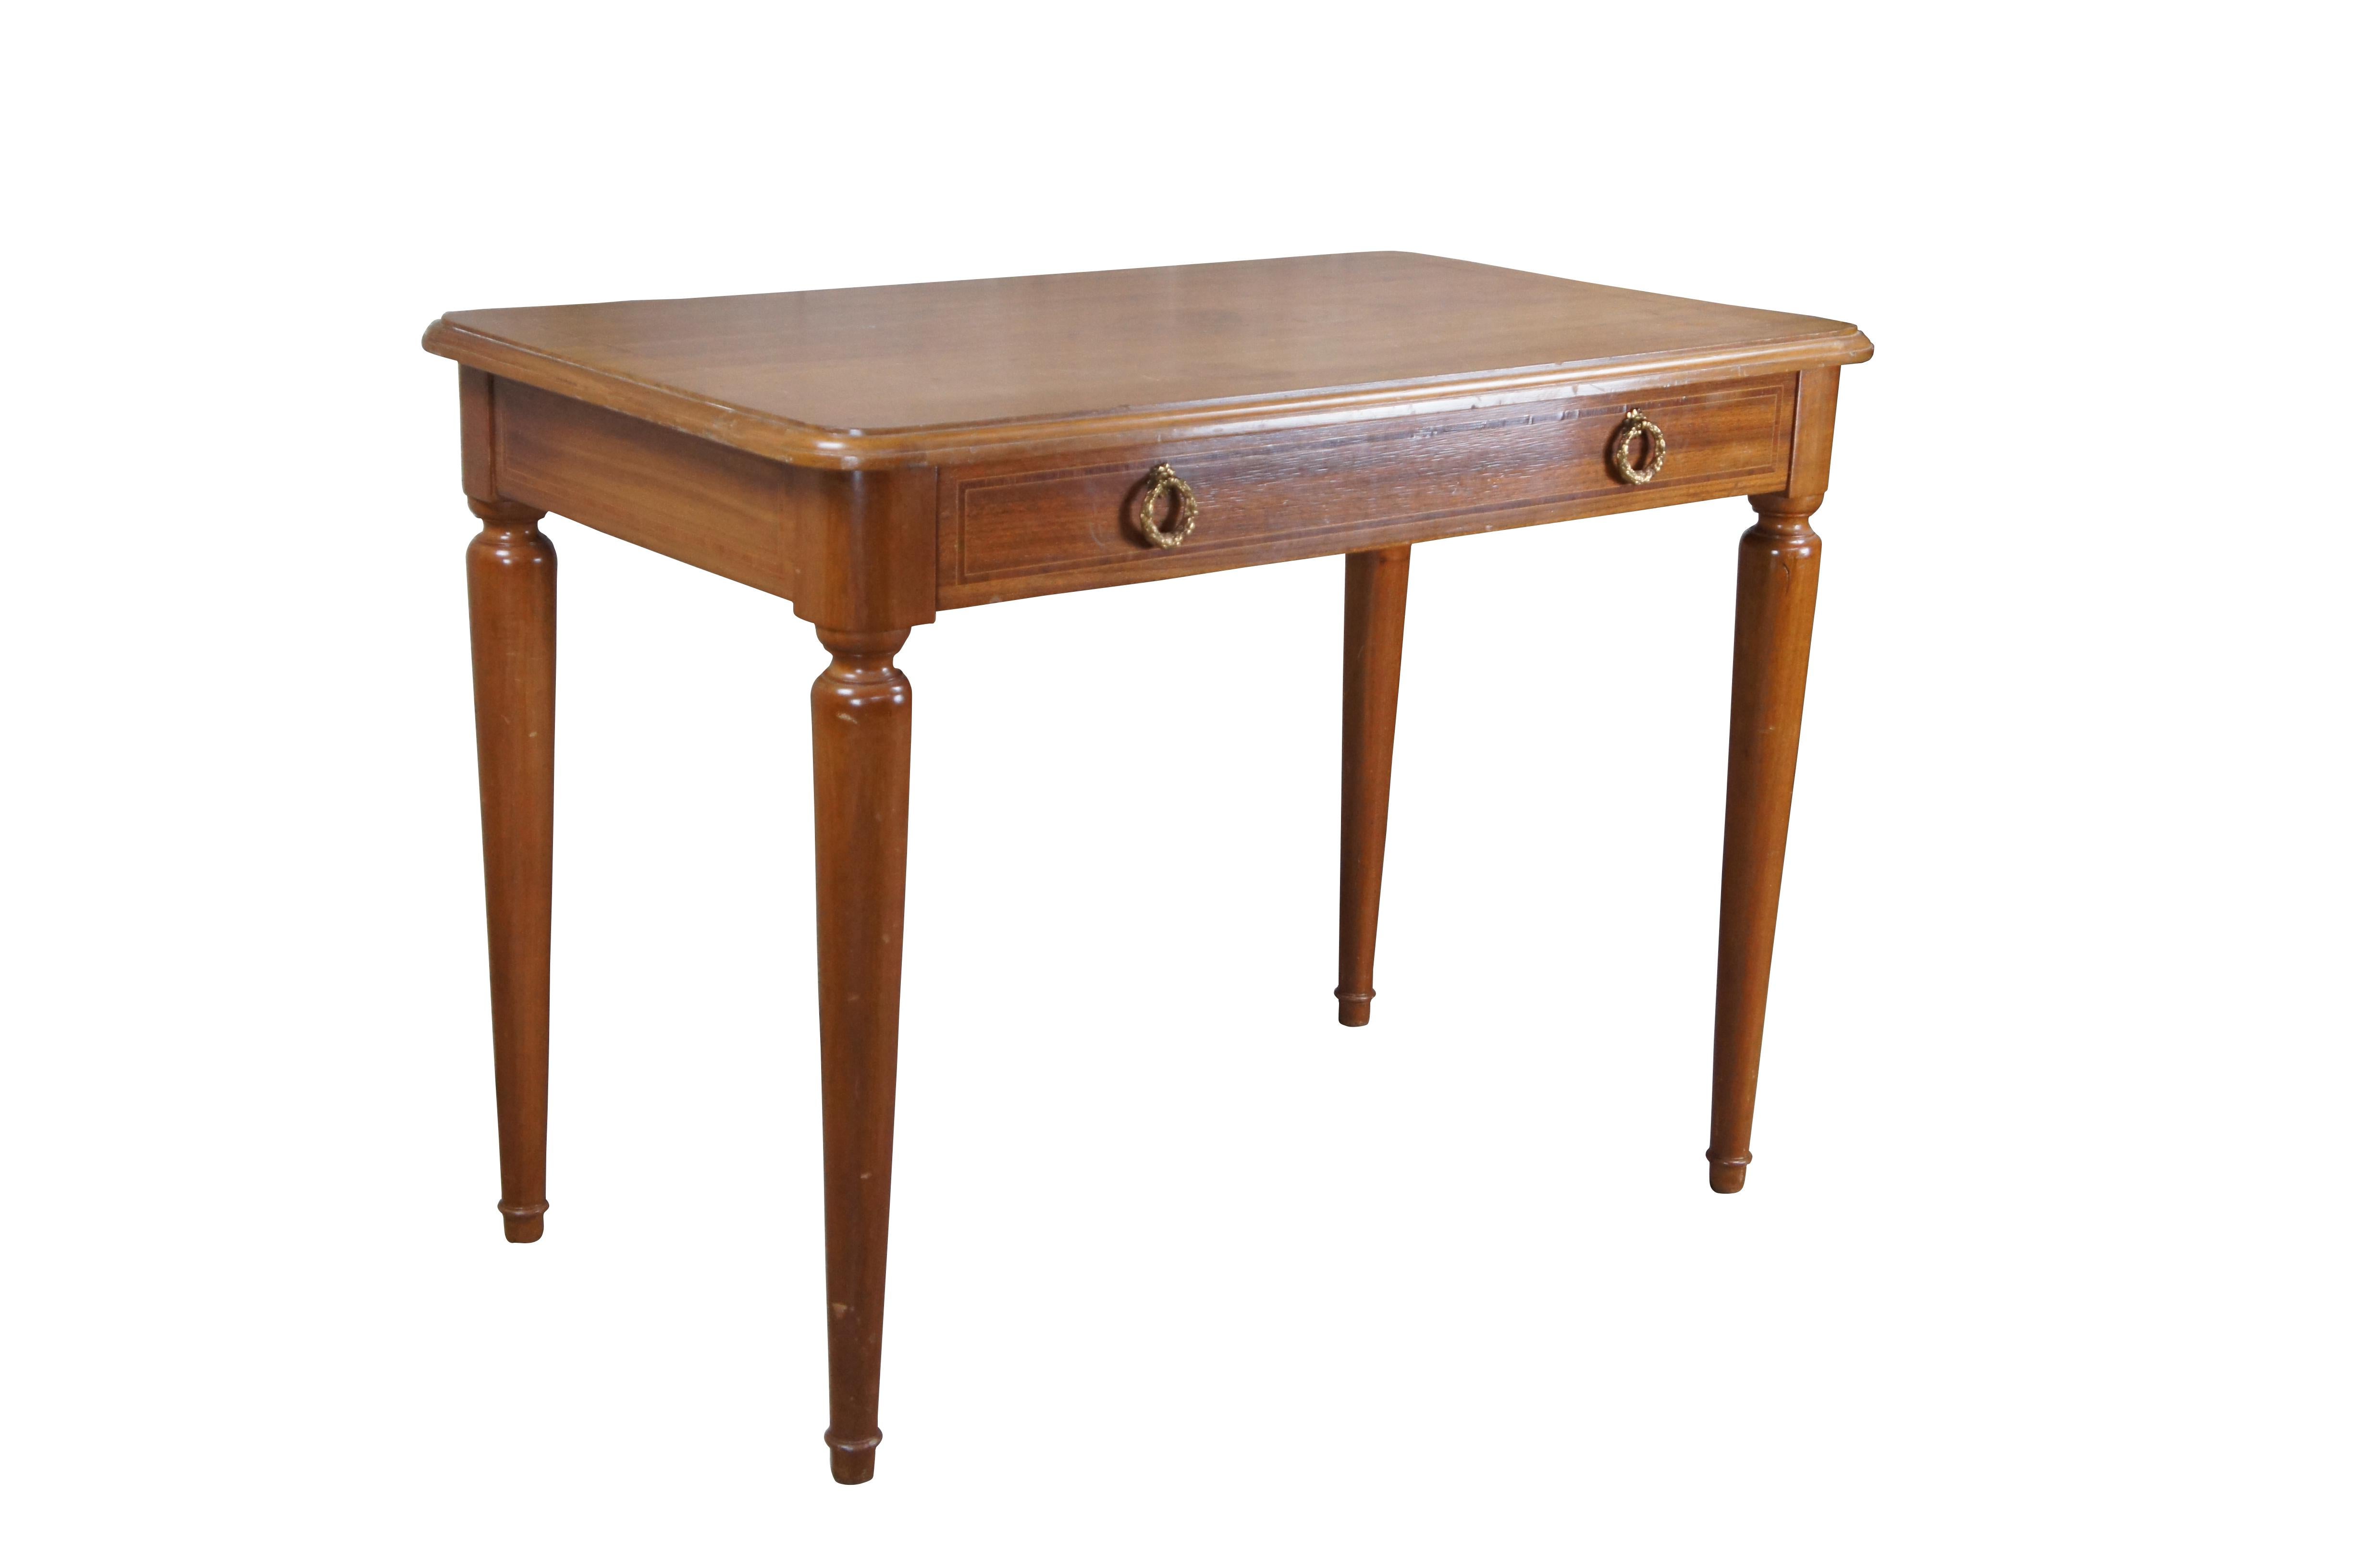 Antique 1930s French Louis XVI style cherry desk with dovetailed drawer. Made from cherry with crossbanded inlay and ormolu drawer pulls. The desk is supported by turned and tapered legs.

Dimensions:
23.5